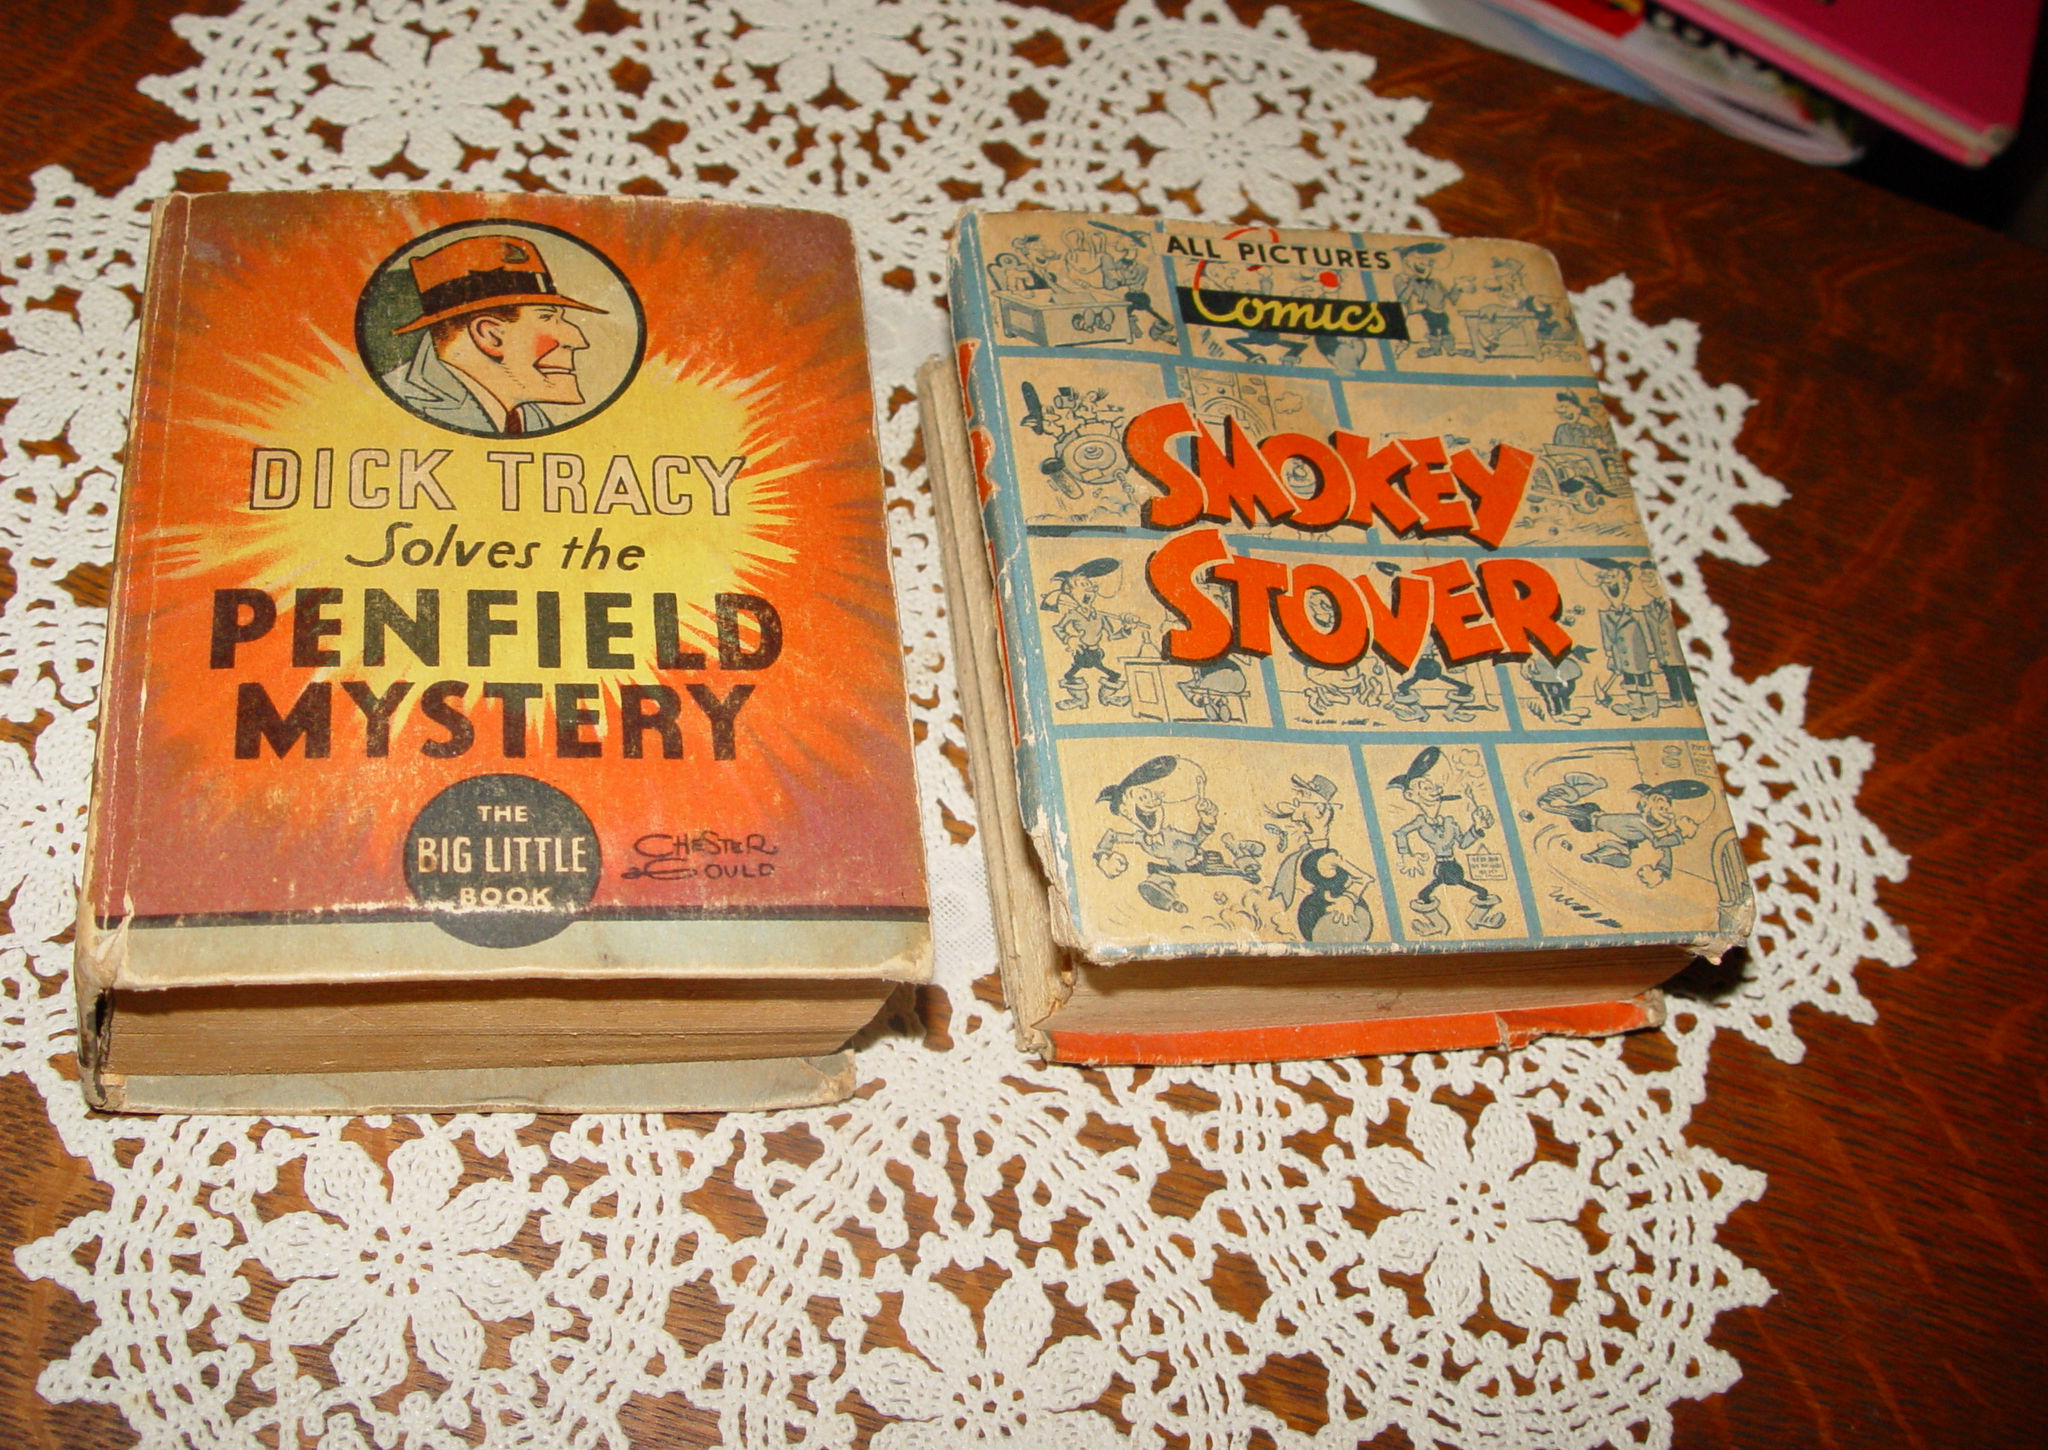 1930s Dick Tracy
                        The Penfield Mystery # 1137 & Smokey Stover
                        # 1413 Big Little Books